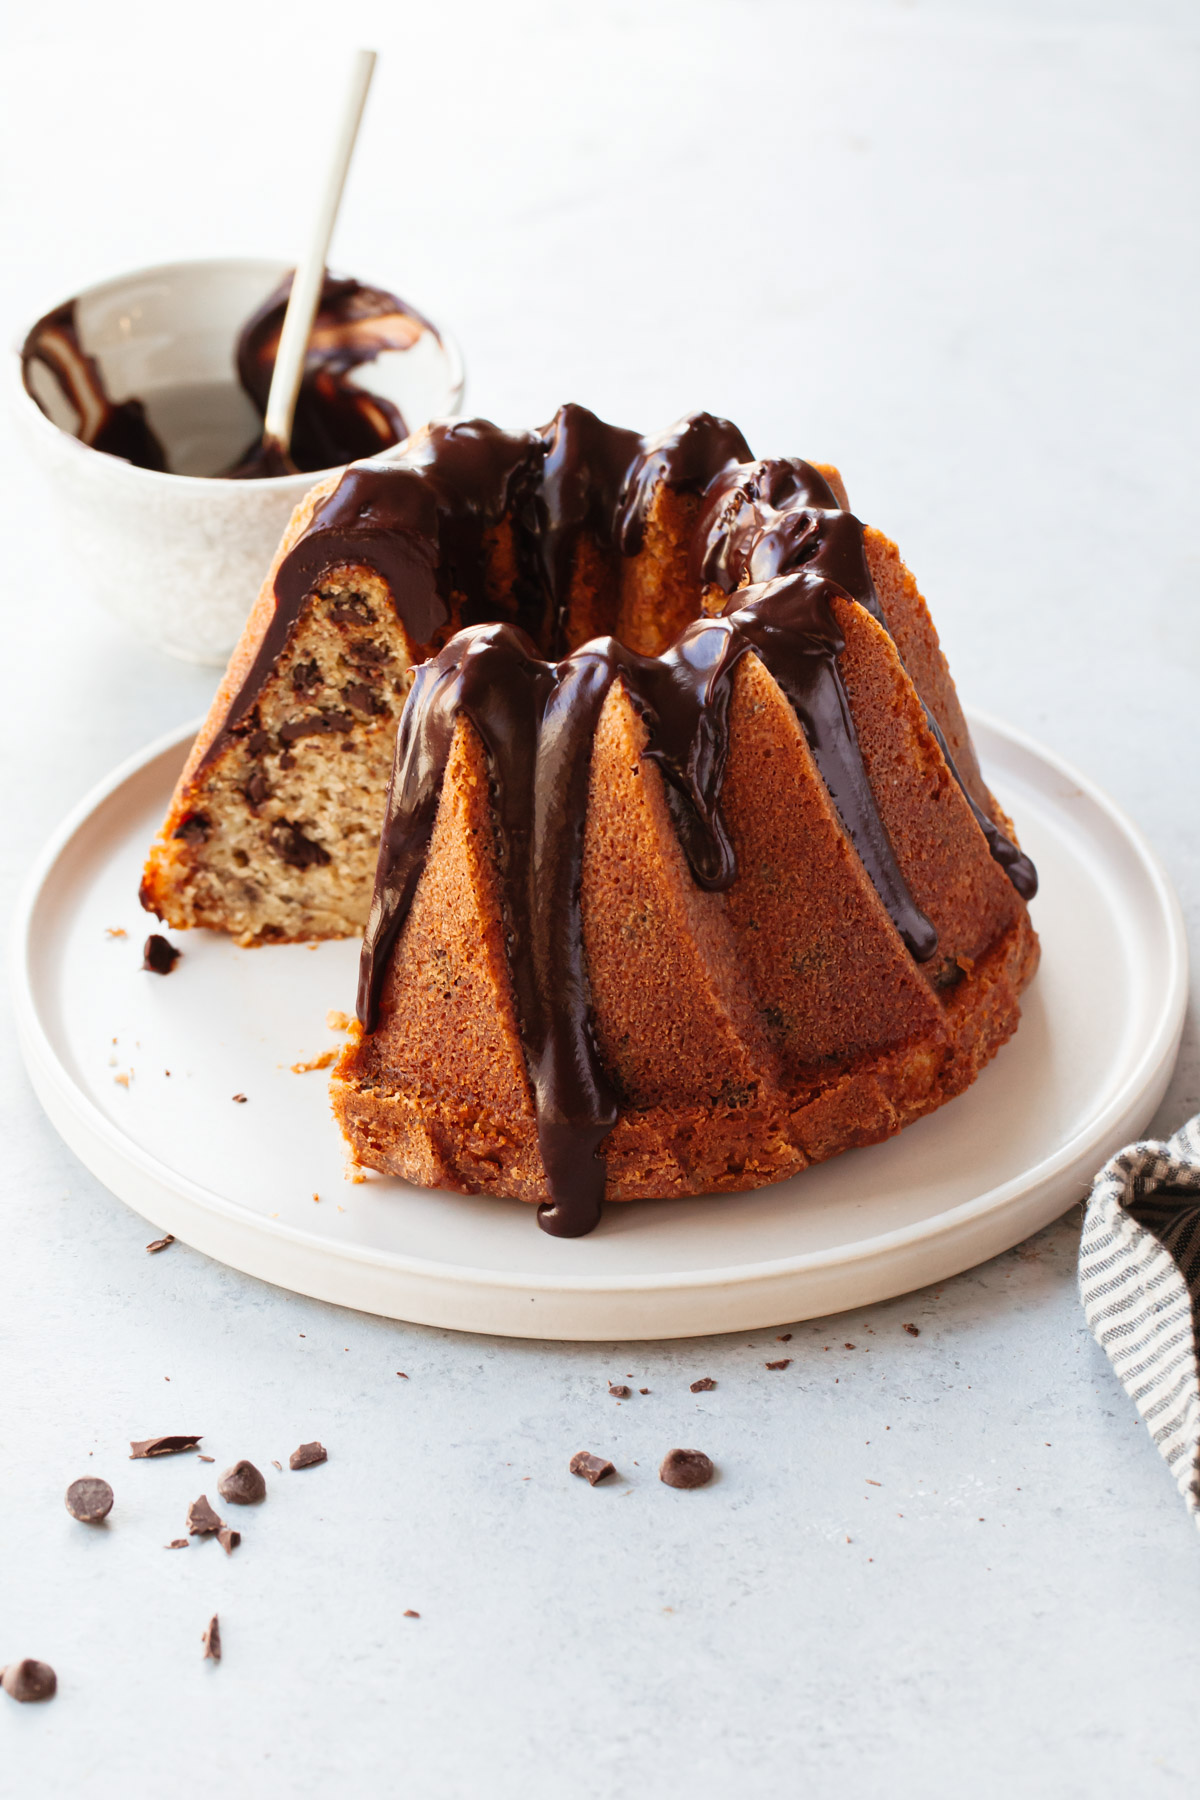 A brown butter banana cake with chocolate glaze